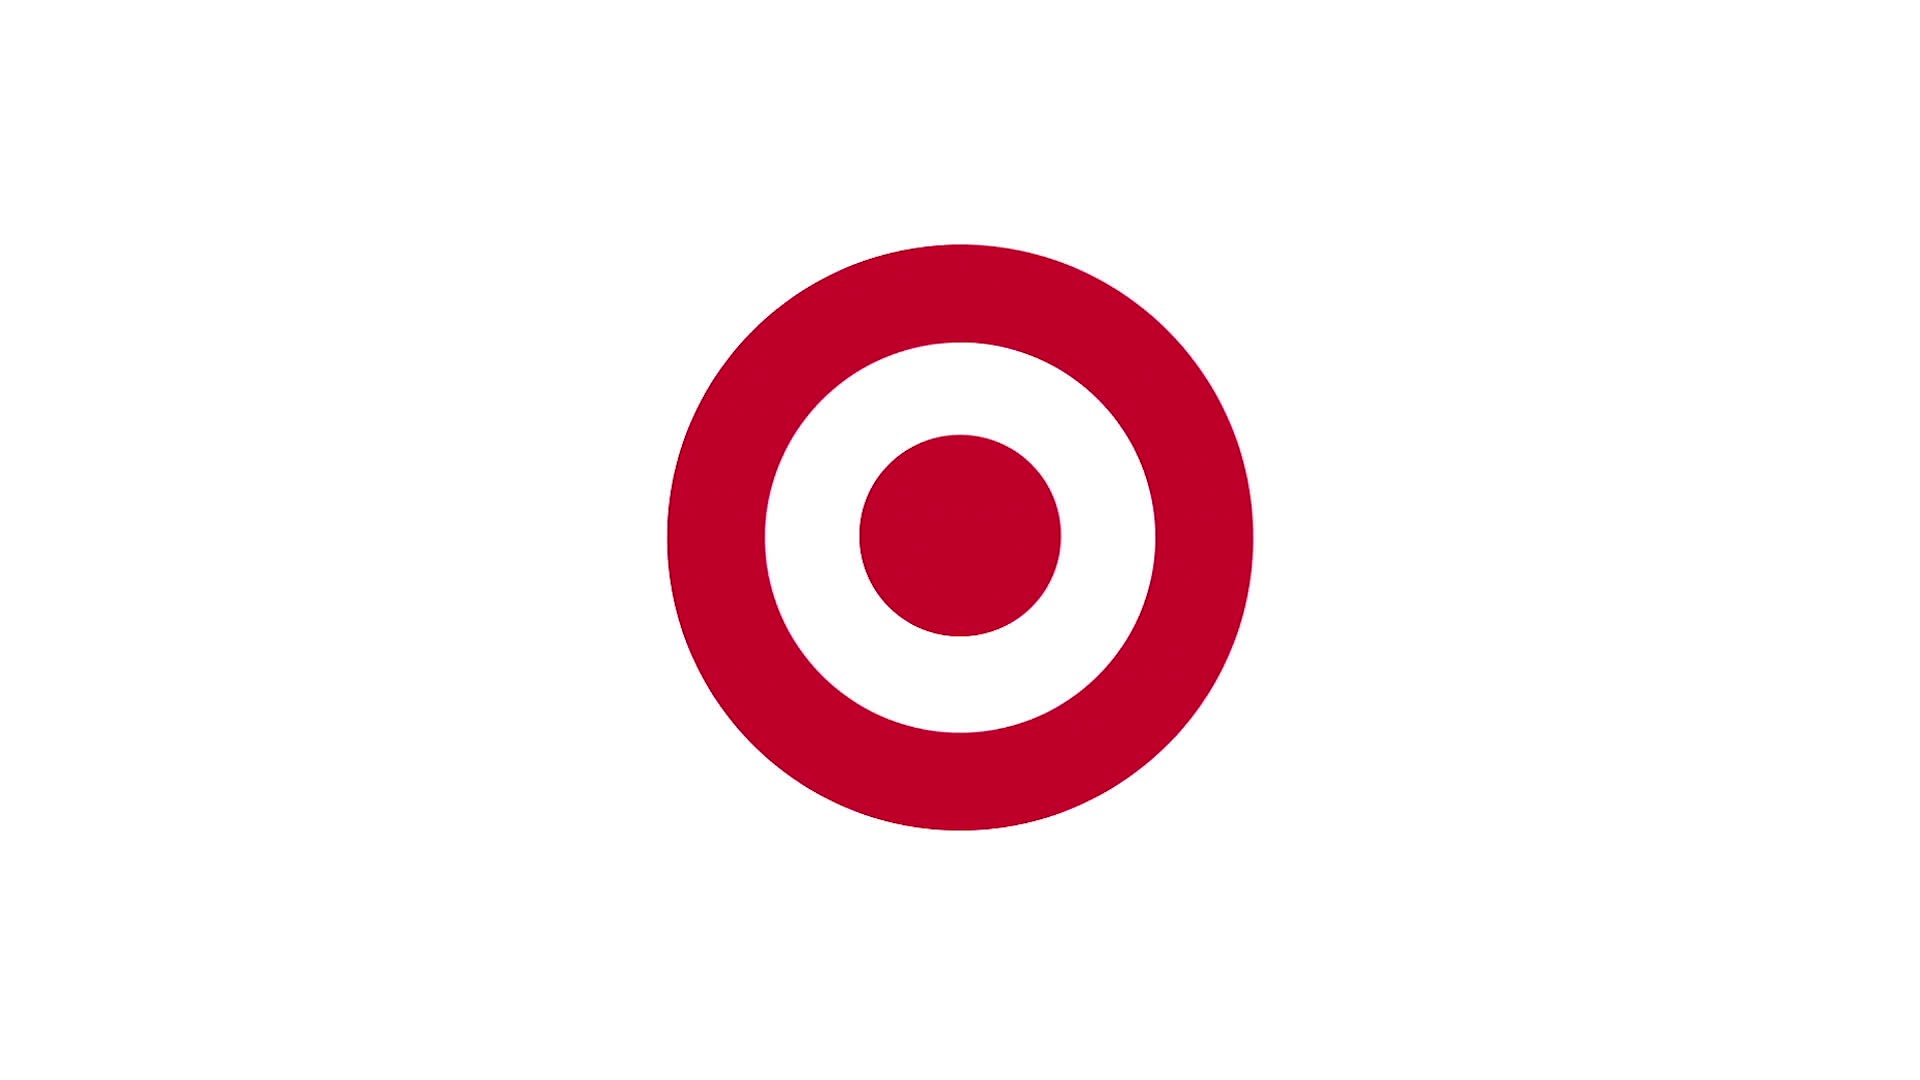 TARGET BULLSEYE'S PLAYGROUND: AN ART, COPY & CODE PROJECT WITH GOOGLE